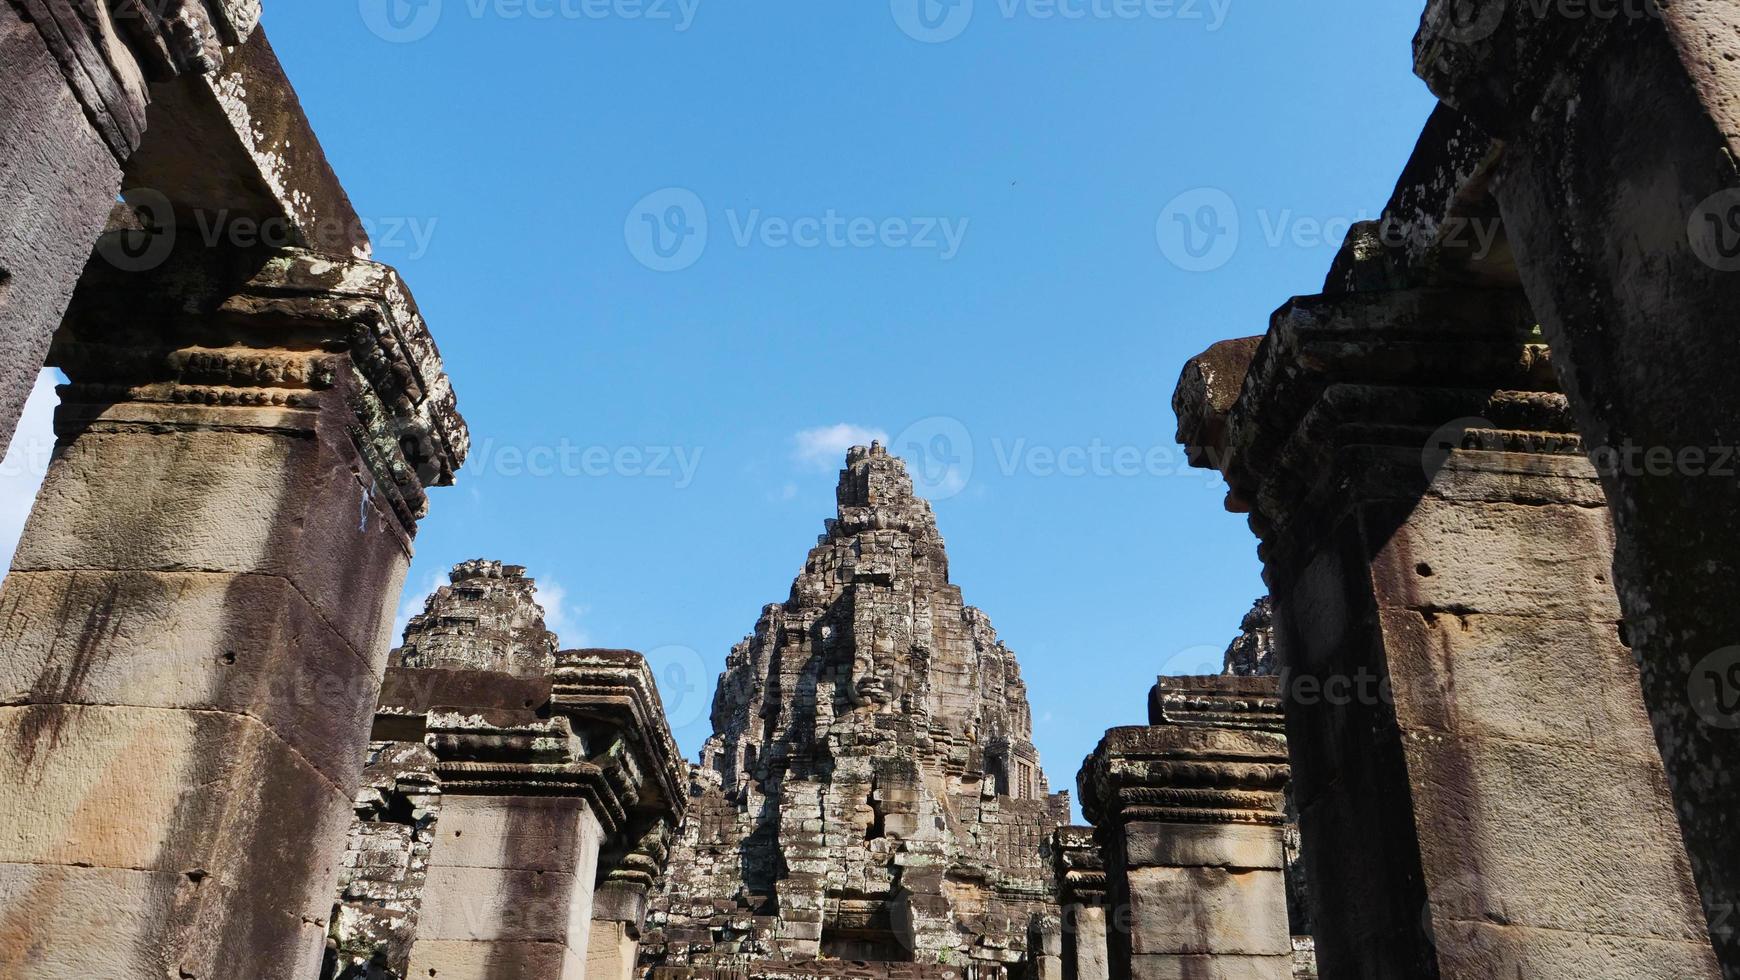 Bayon Temple in Angkor wat complex, Siem Reap Cambodia photo